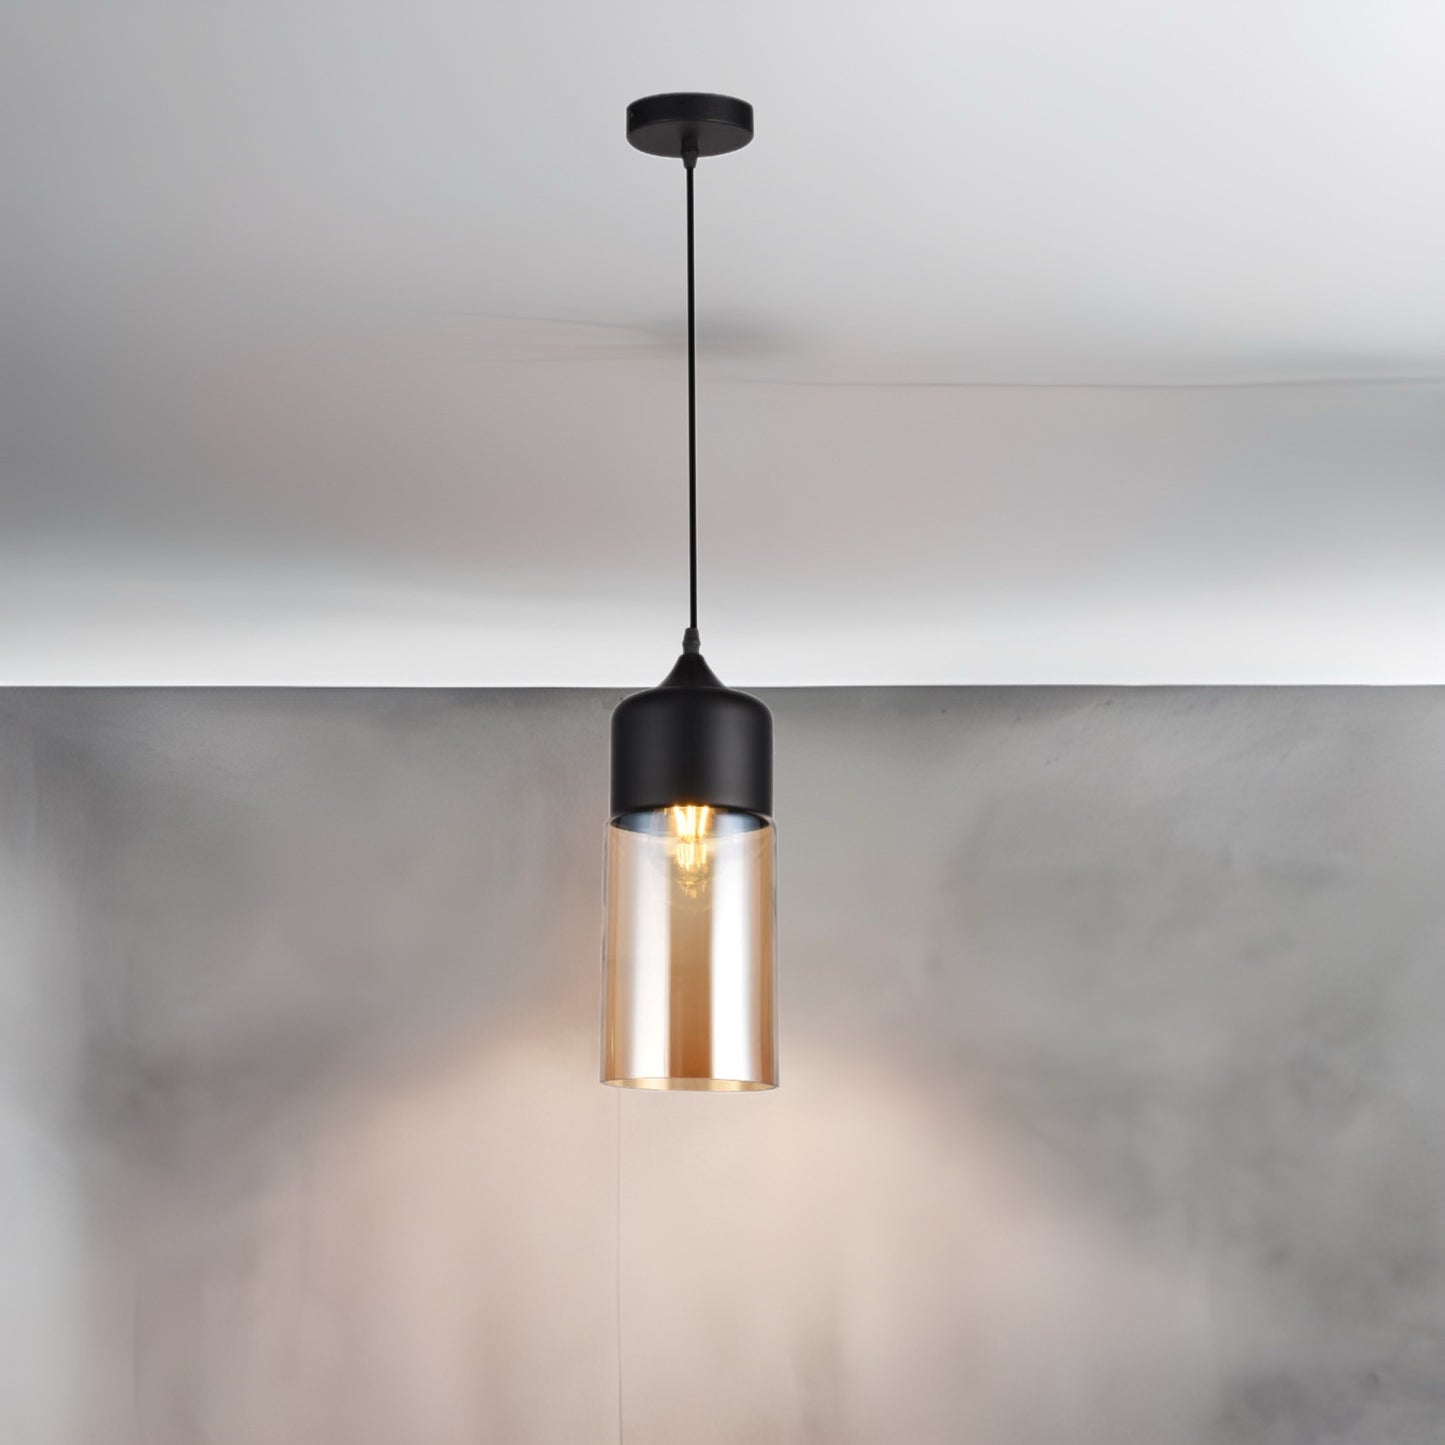 Our Lender pendant light is a stylish addition suitable for every room, its contrasting black and gold smoked glass cylinder body with matching black ceiling rose and cable creates an amazing feature on any ceiling. The lamp looks great with a filament light bulb, especially in industrial and modern interiors.